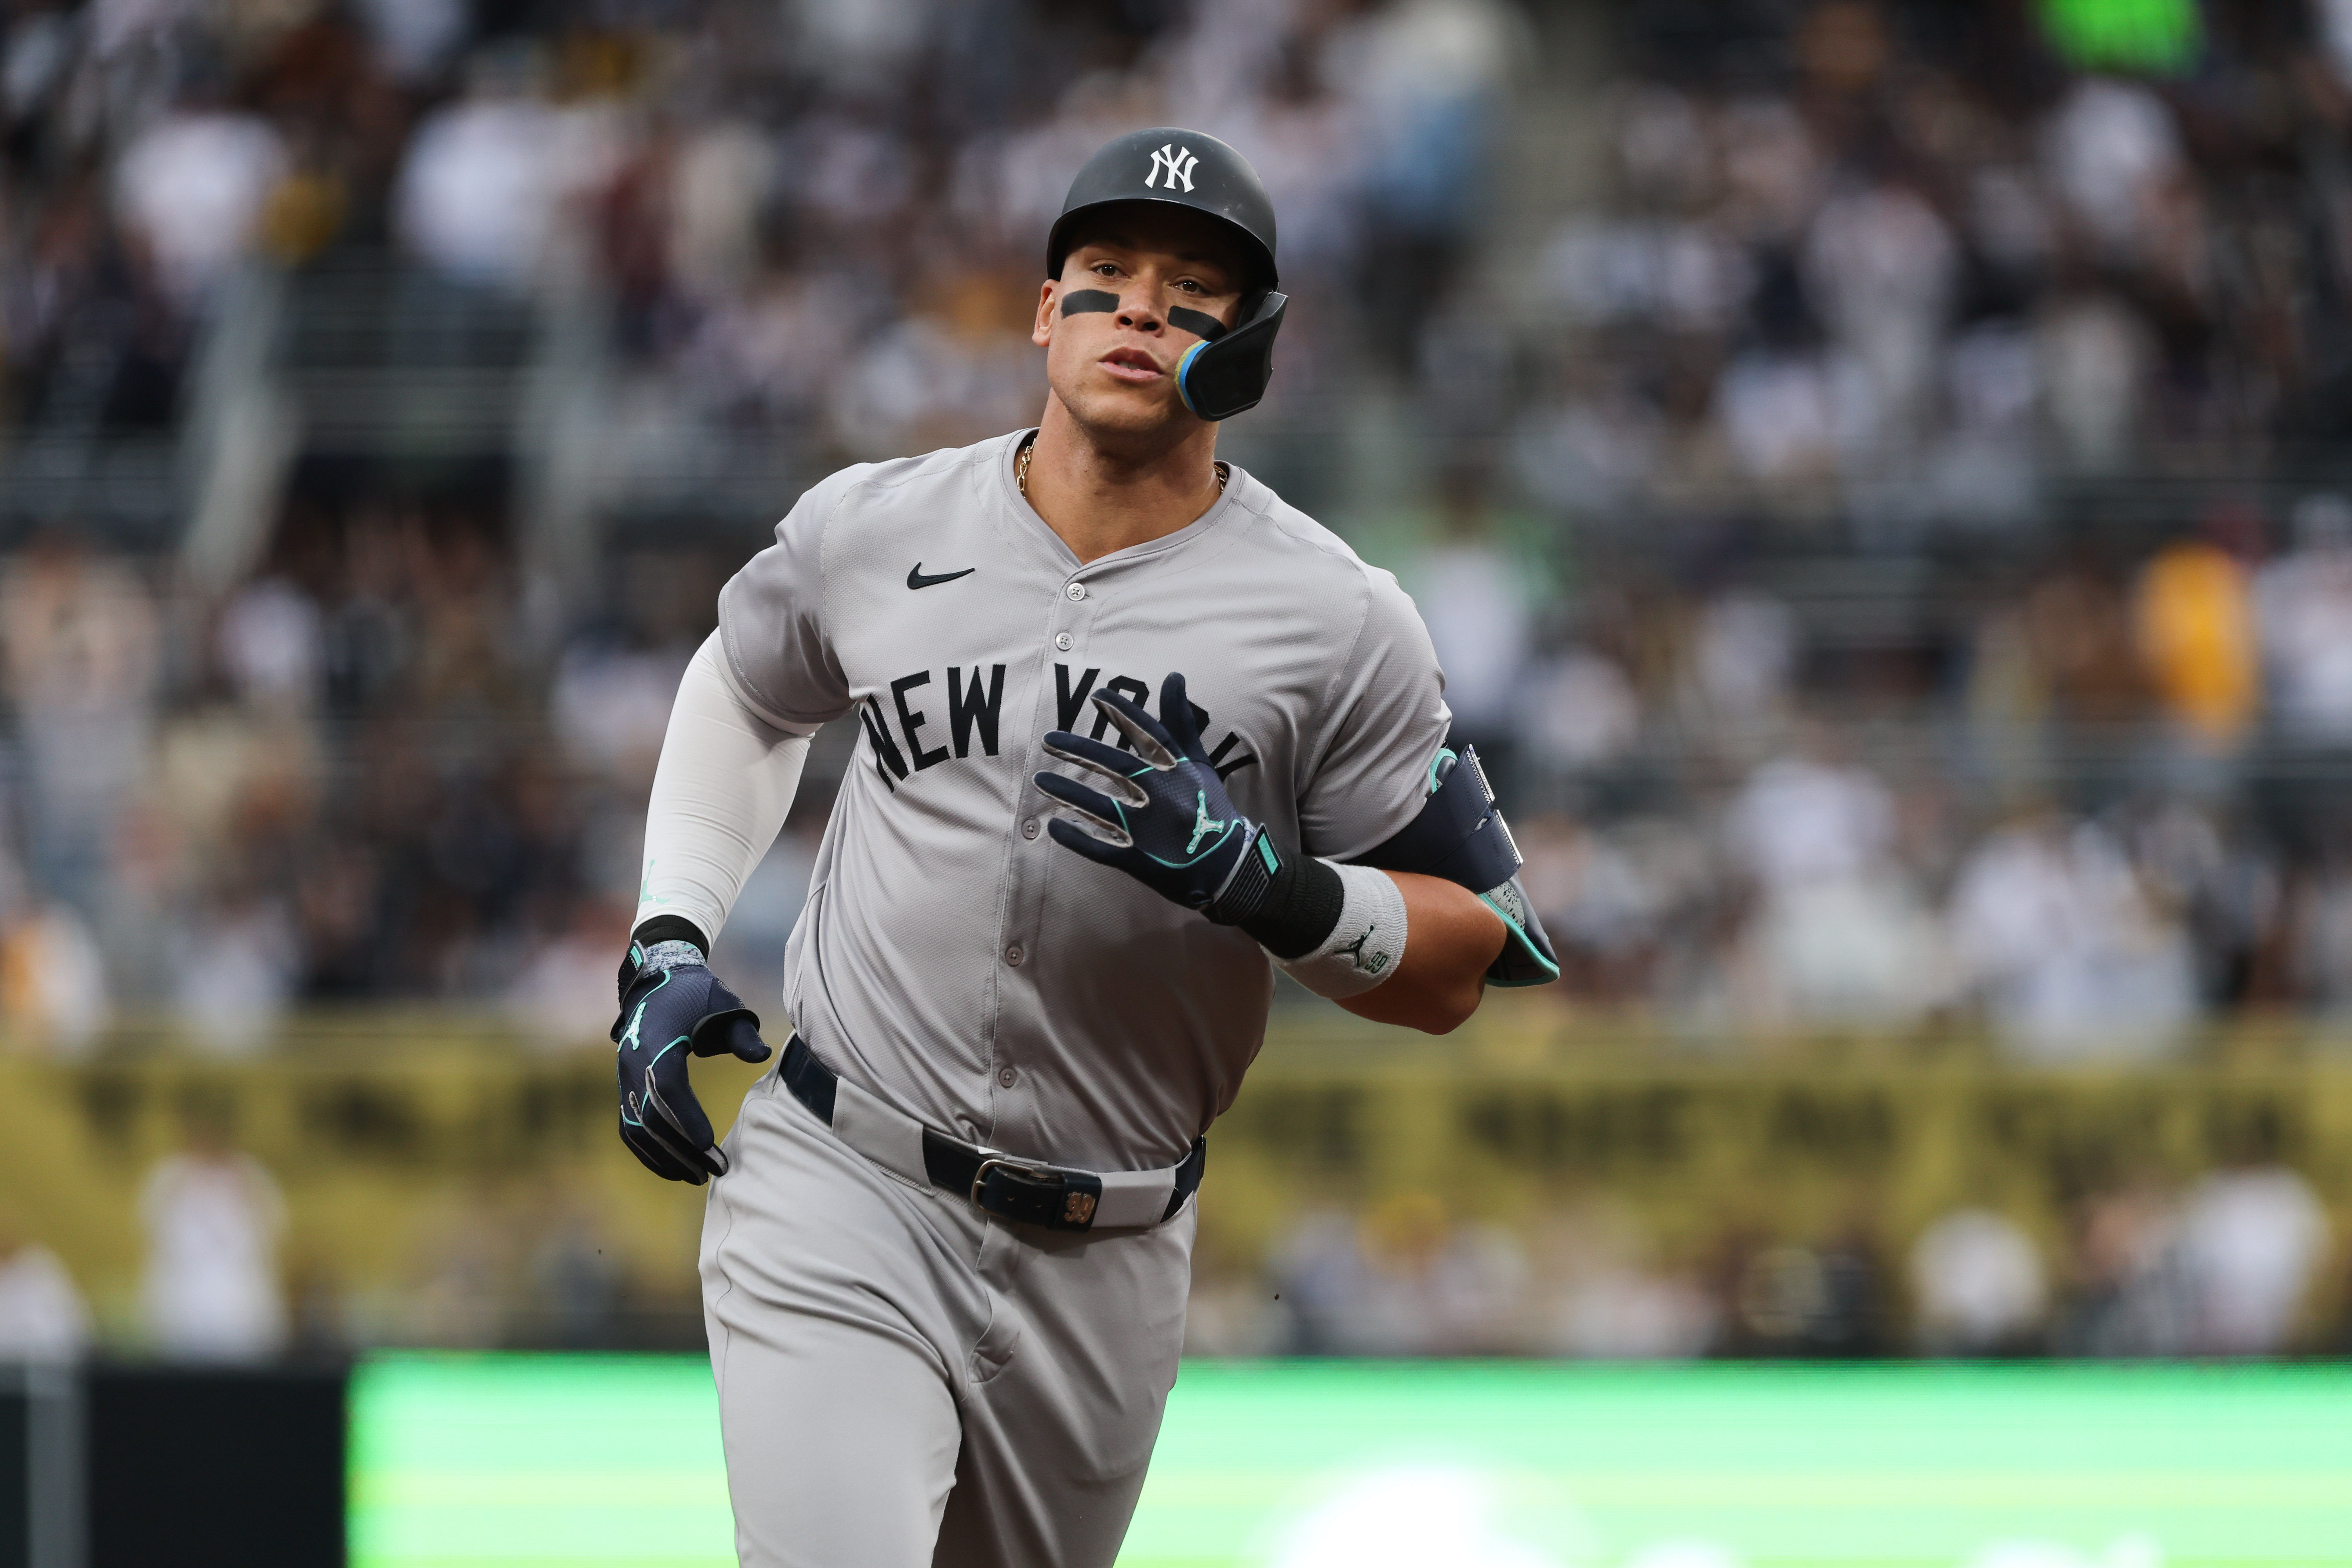 Aaron Judge continued crushing the ball